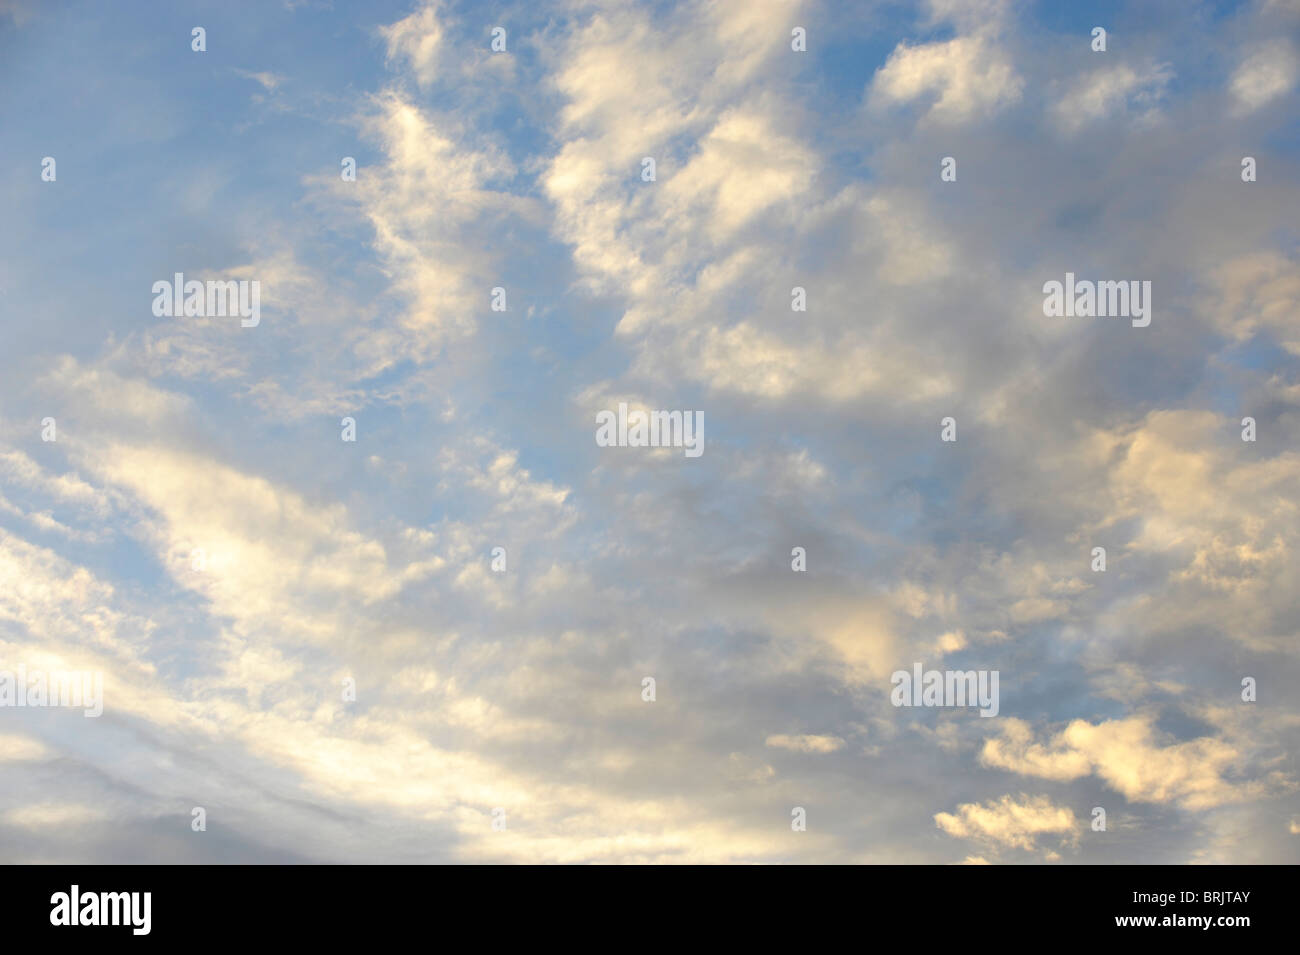 Summer evening sky of light cirrus clouds over the South Downs National Park, Hampshire, England Stock Photo